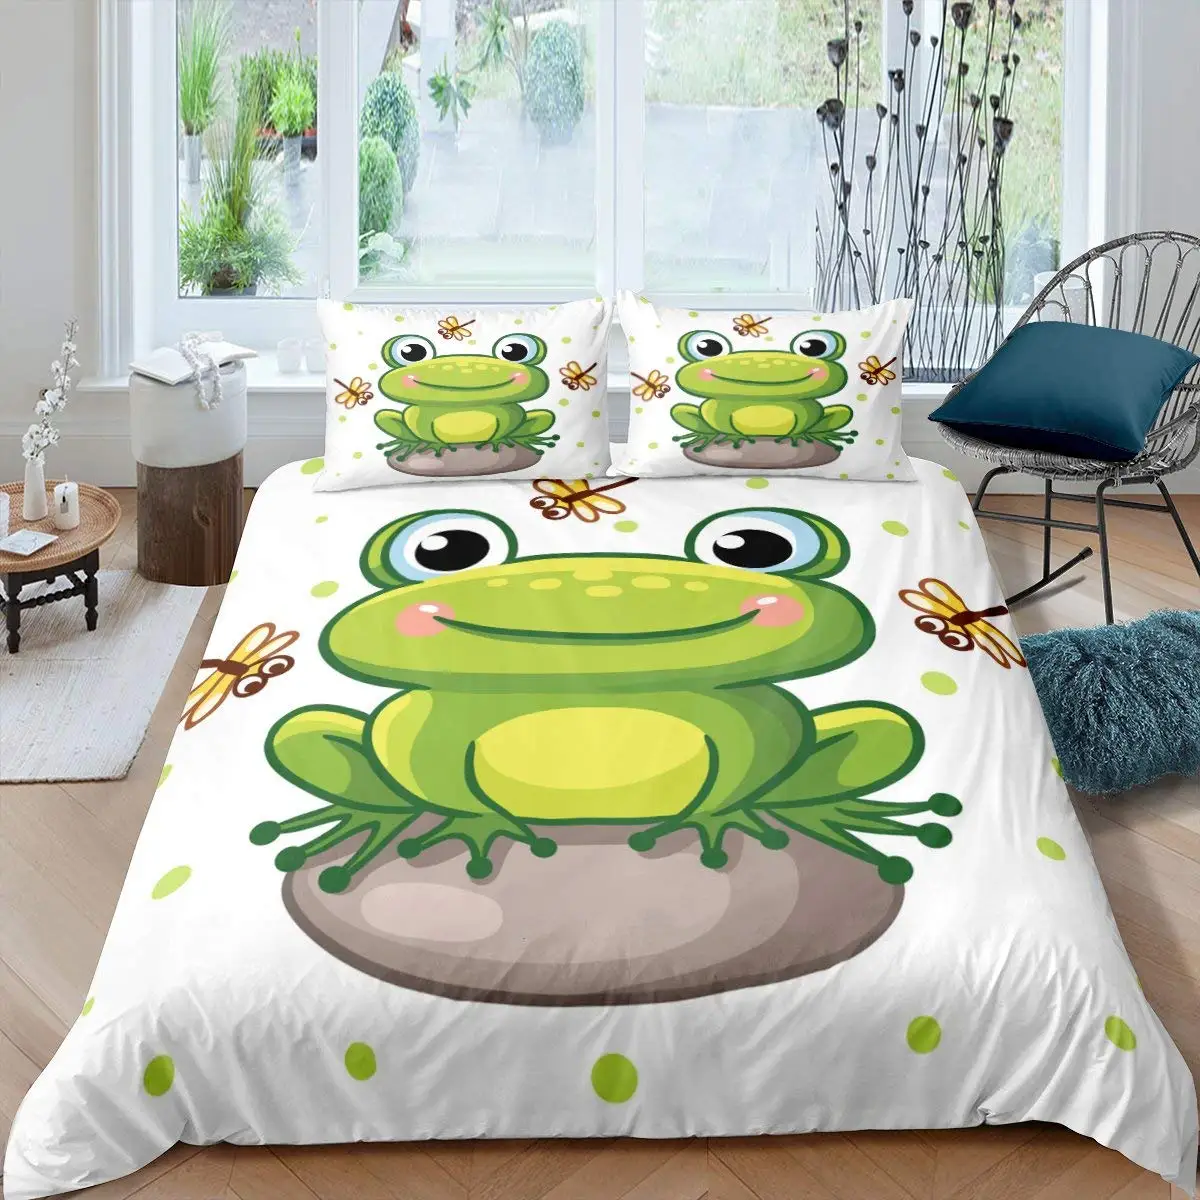 

Cartoon Frog Duvet Cover Set Light Green Cartoon Frogs Cute Dragonfly Animal Bedding Set for Kid Twin Size Polyester Quilt